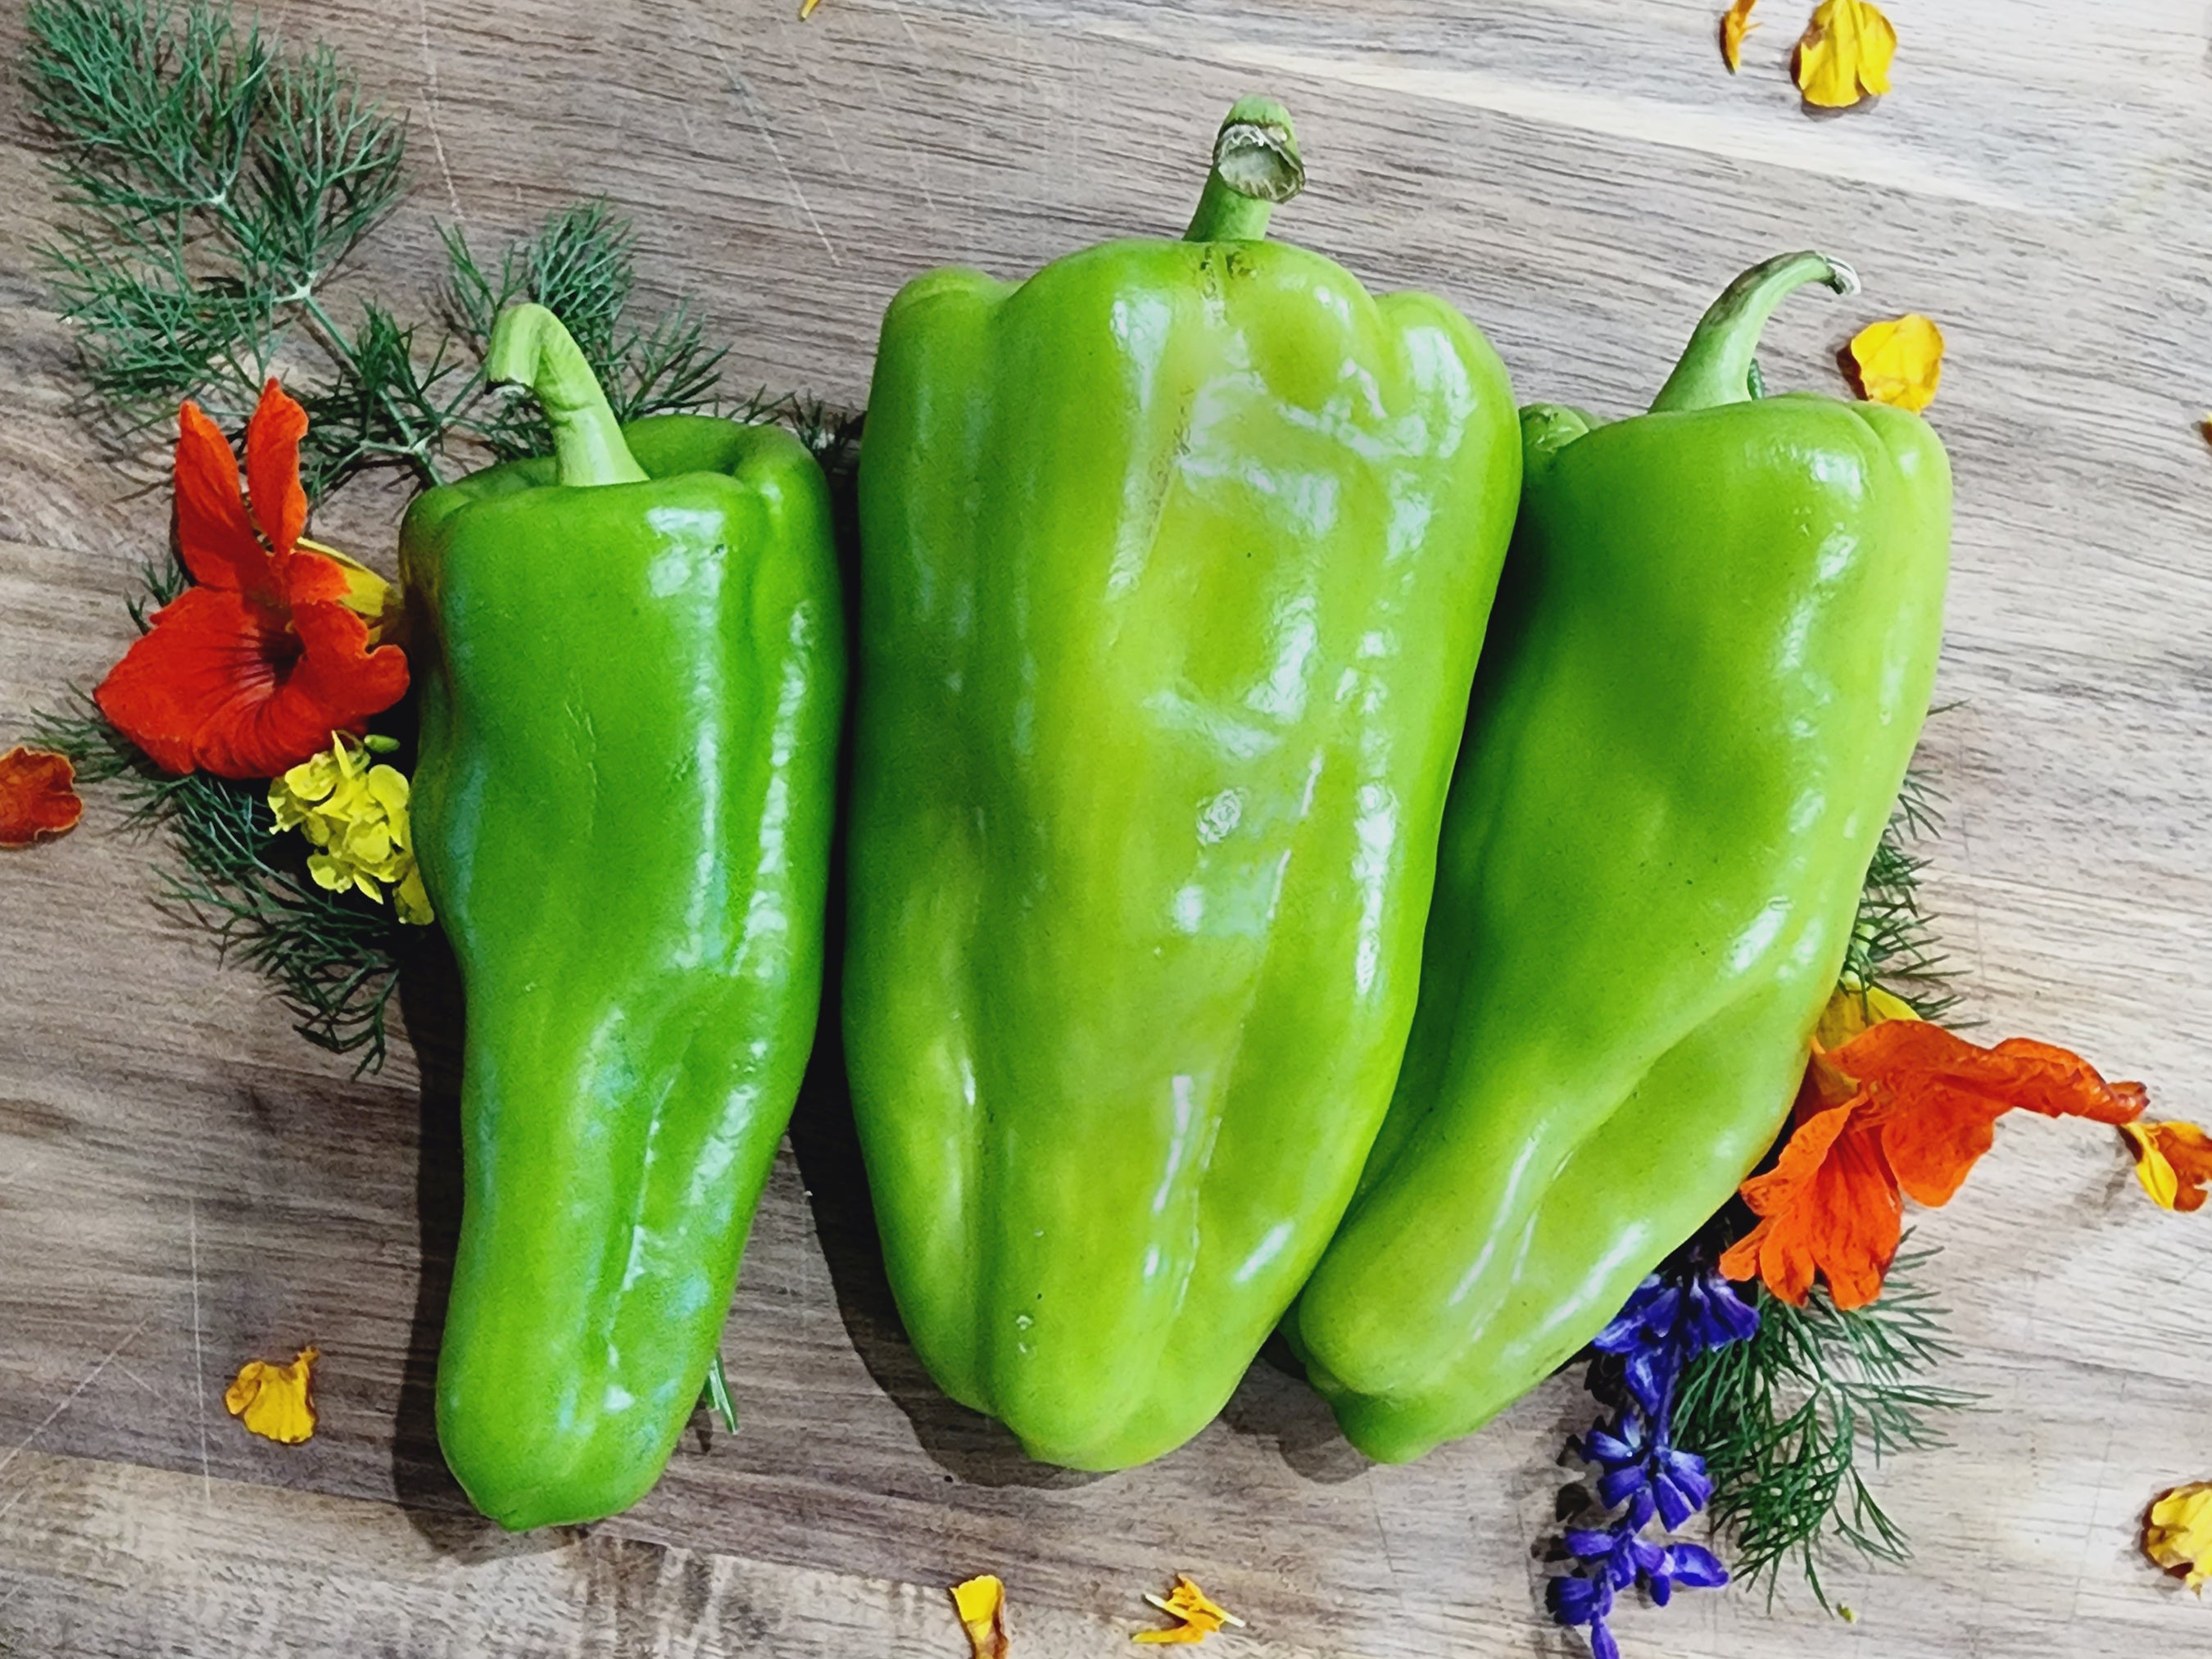 What Are Cubanelle Peppers?